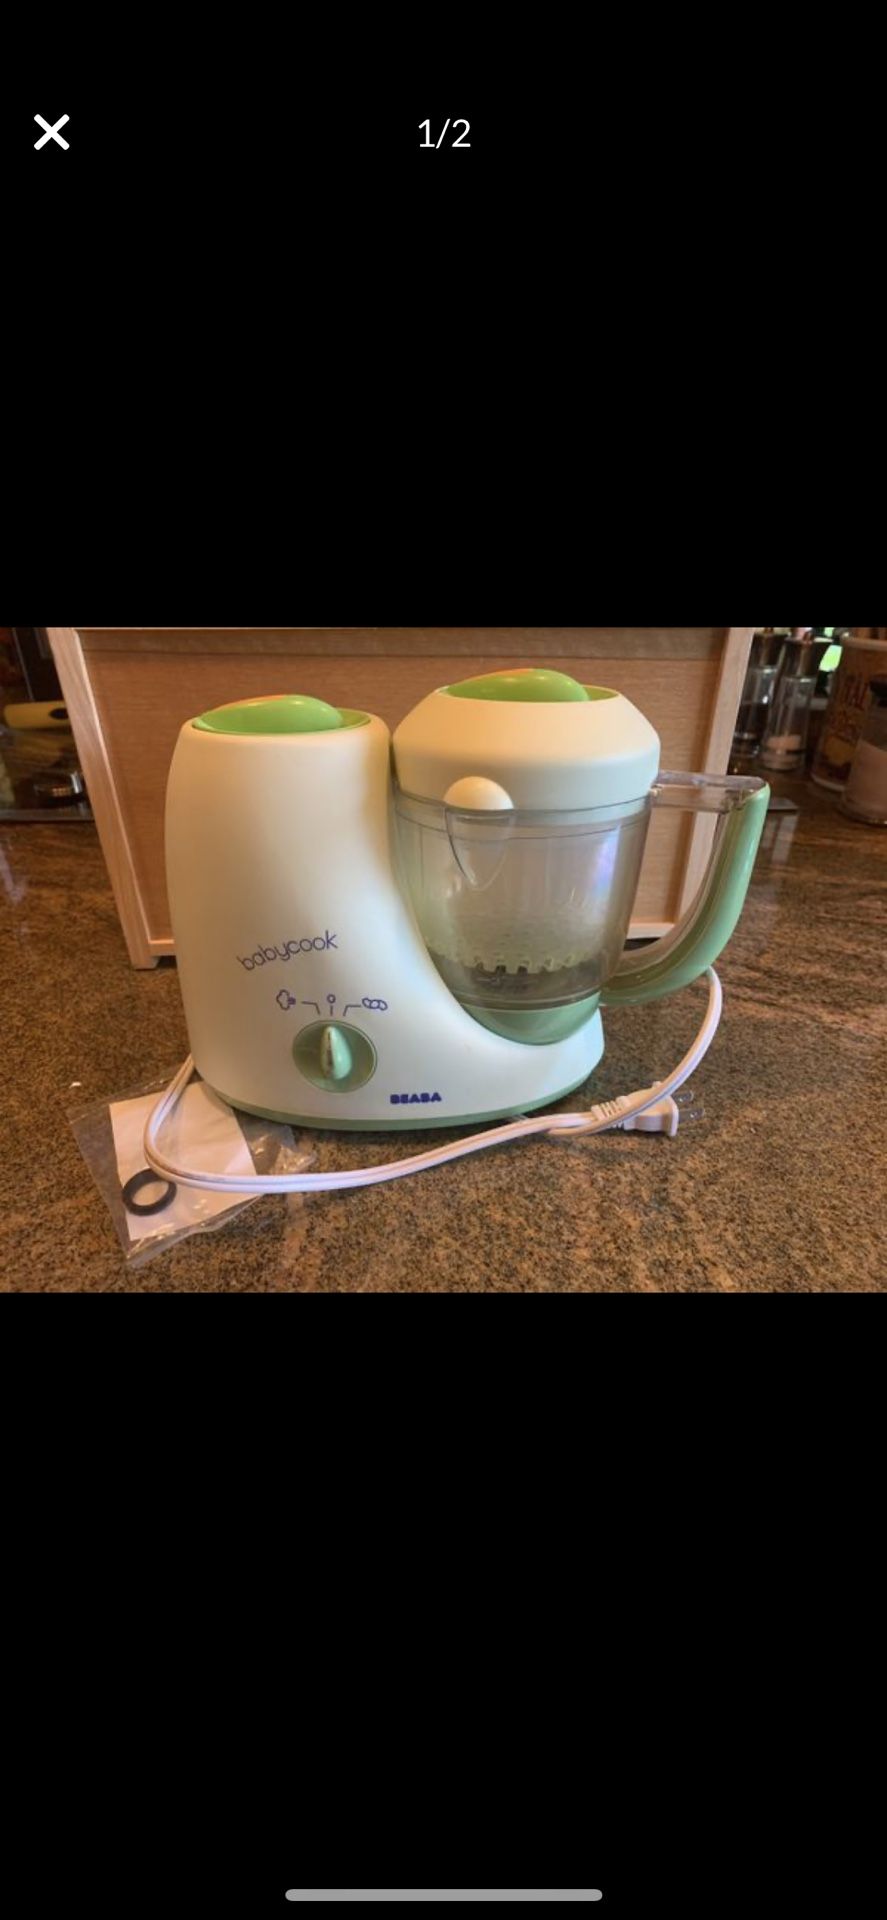 $240 BabyCook Cooker like new- PRICE REDUCED